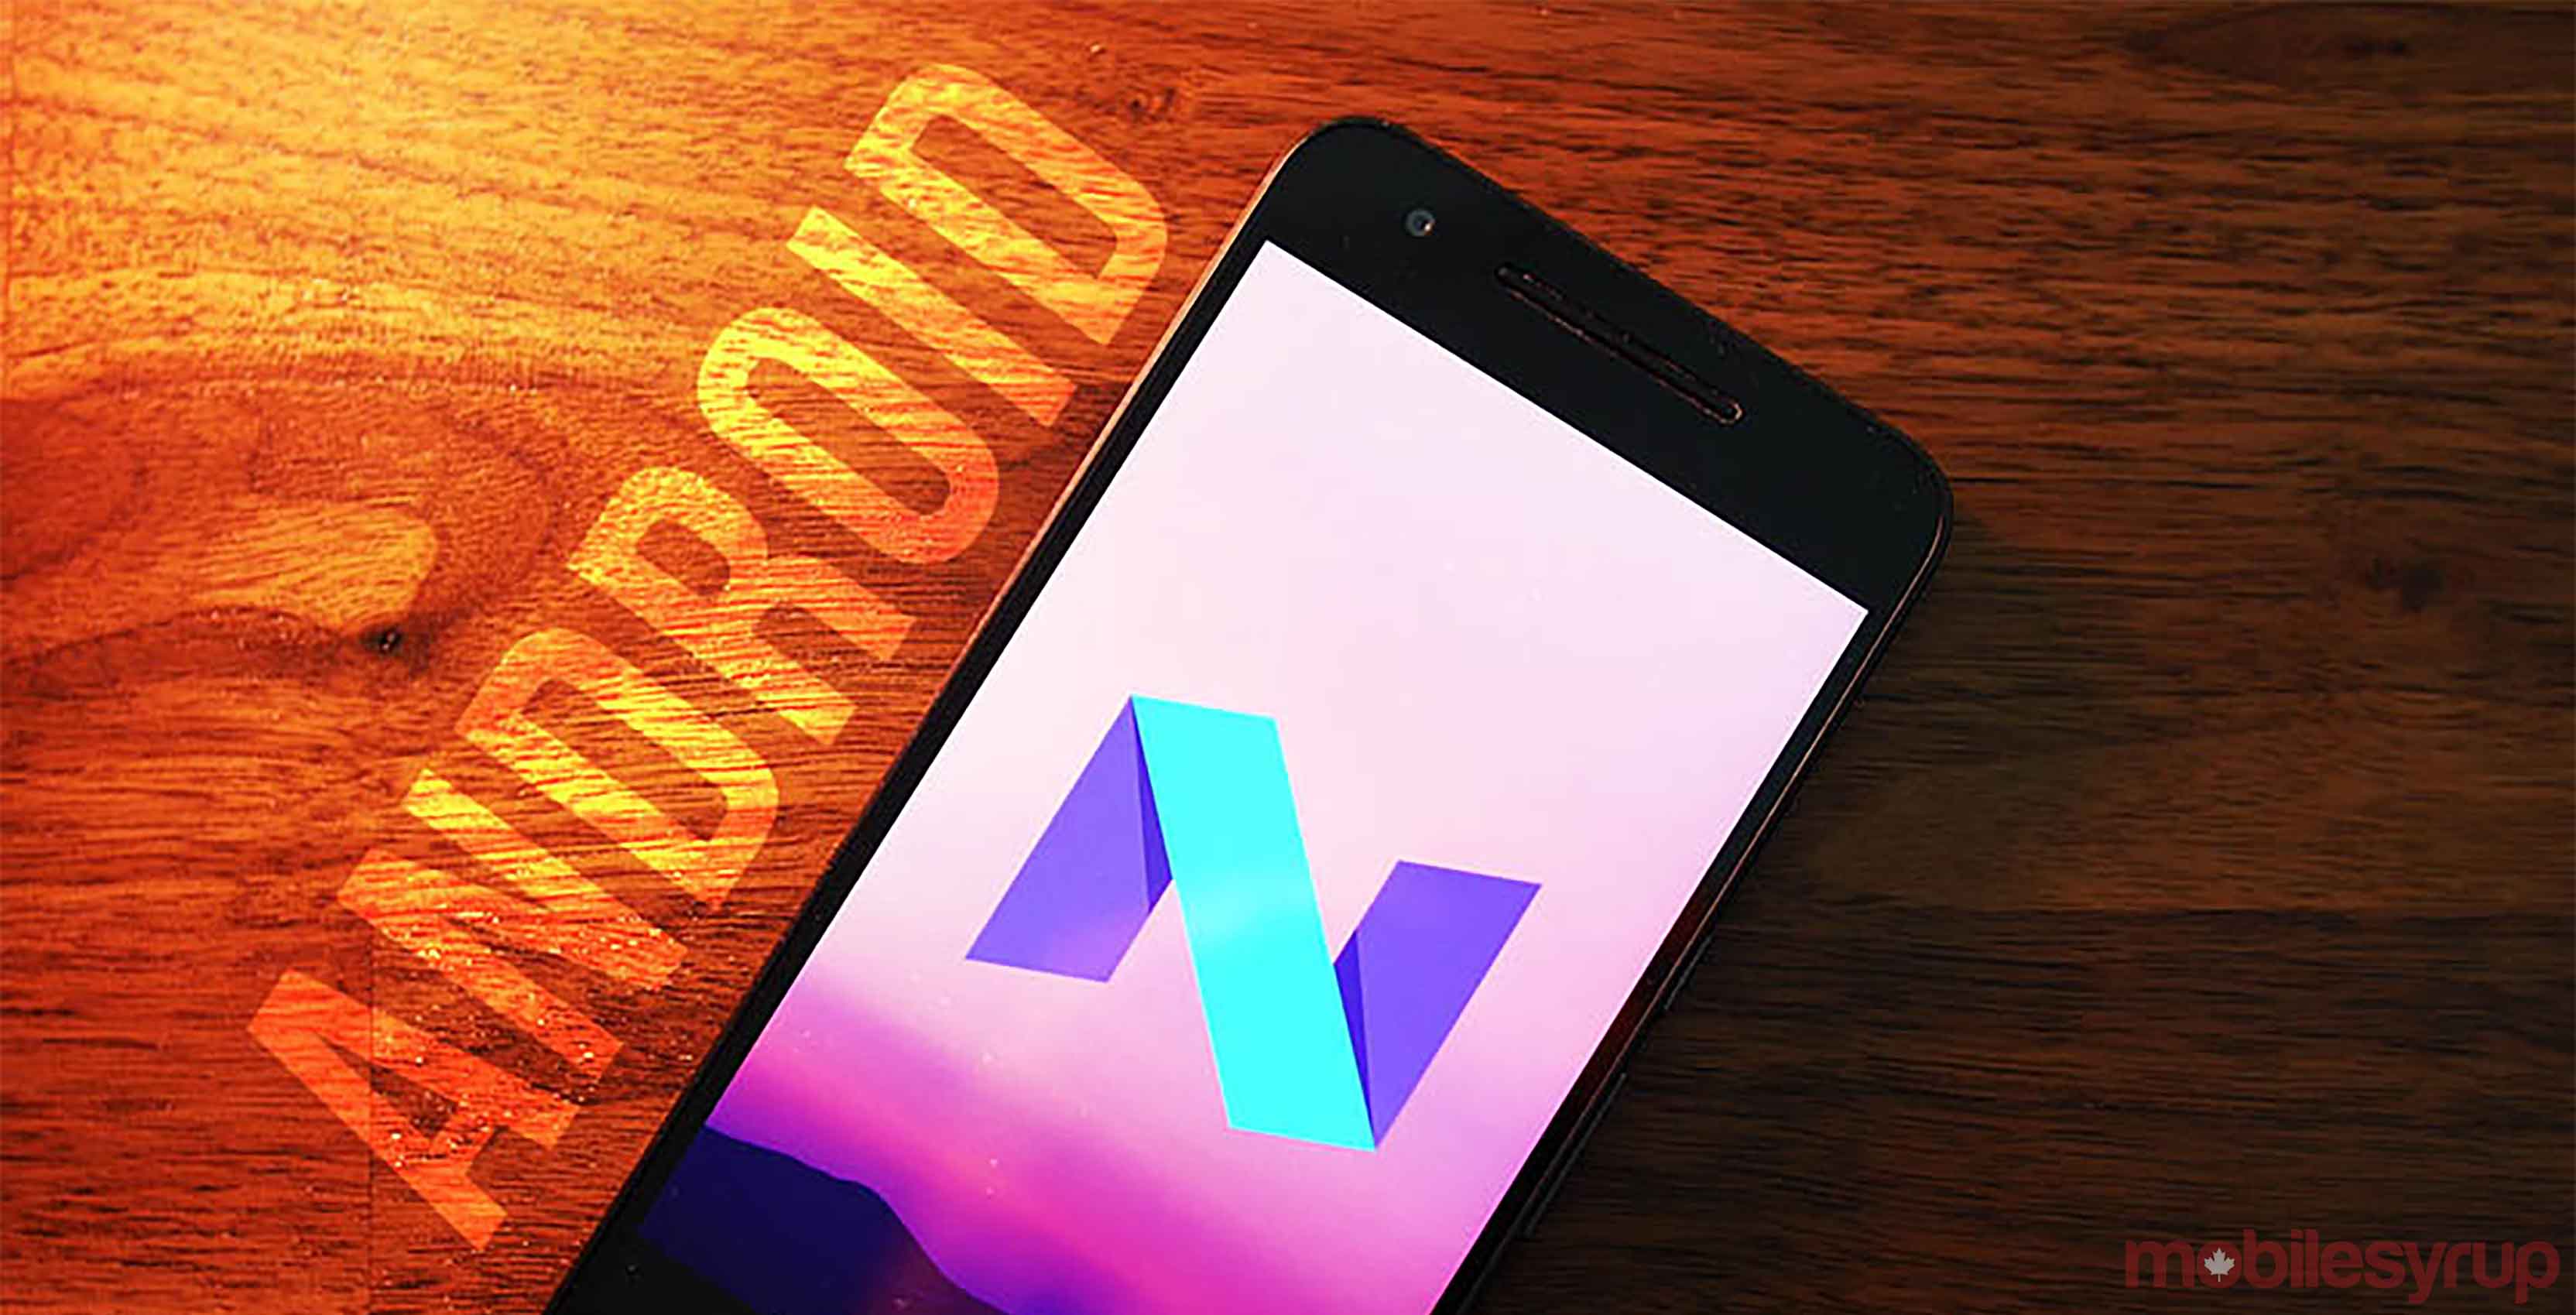 smartphone running Android 7.1.2 Nougat